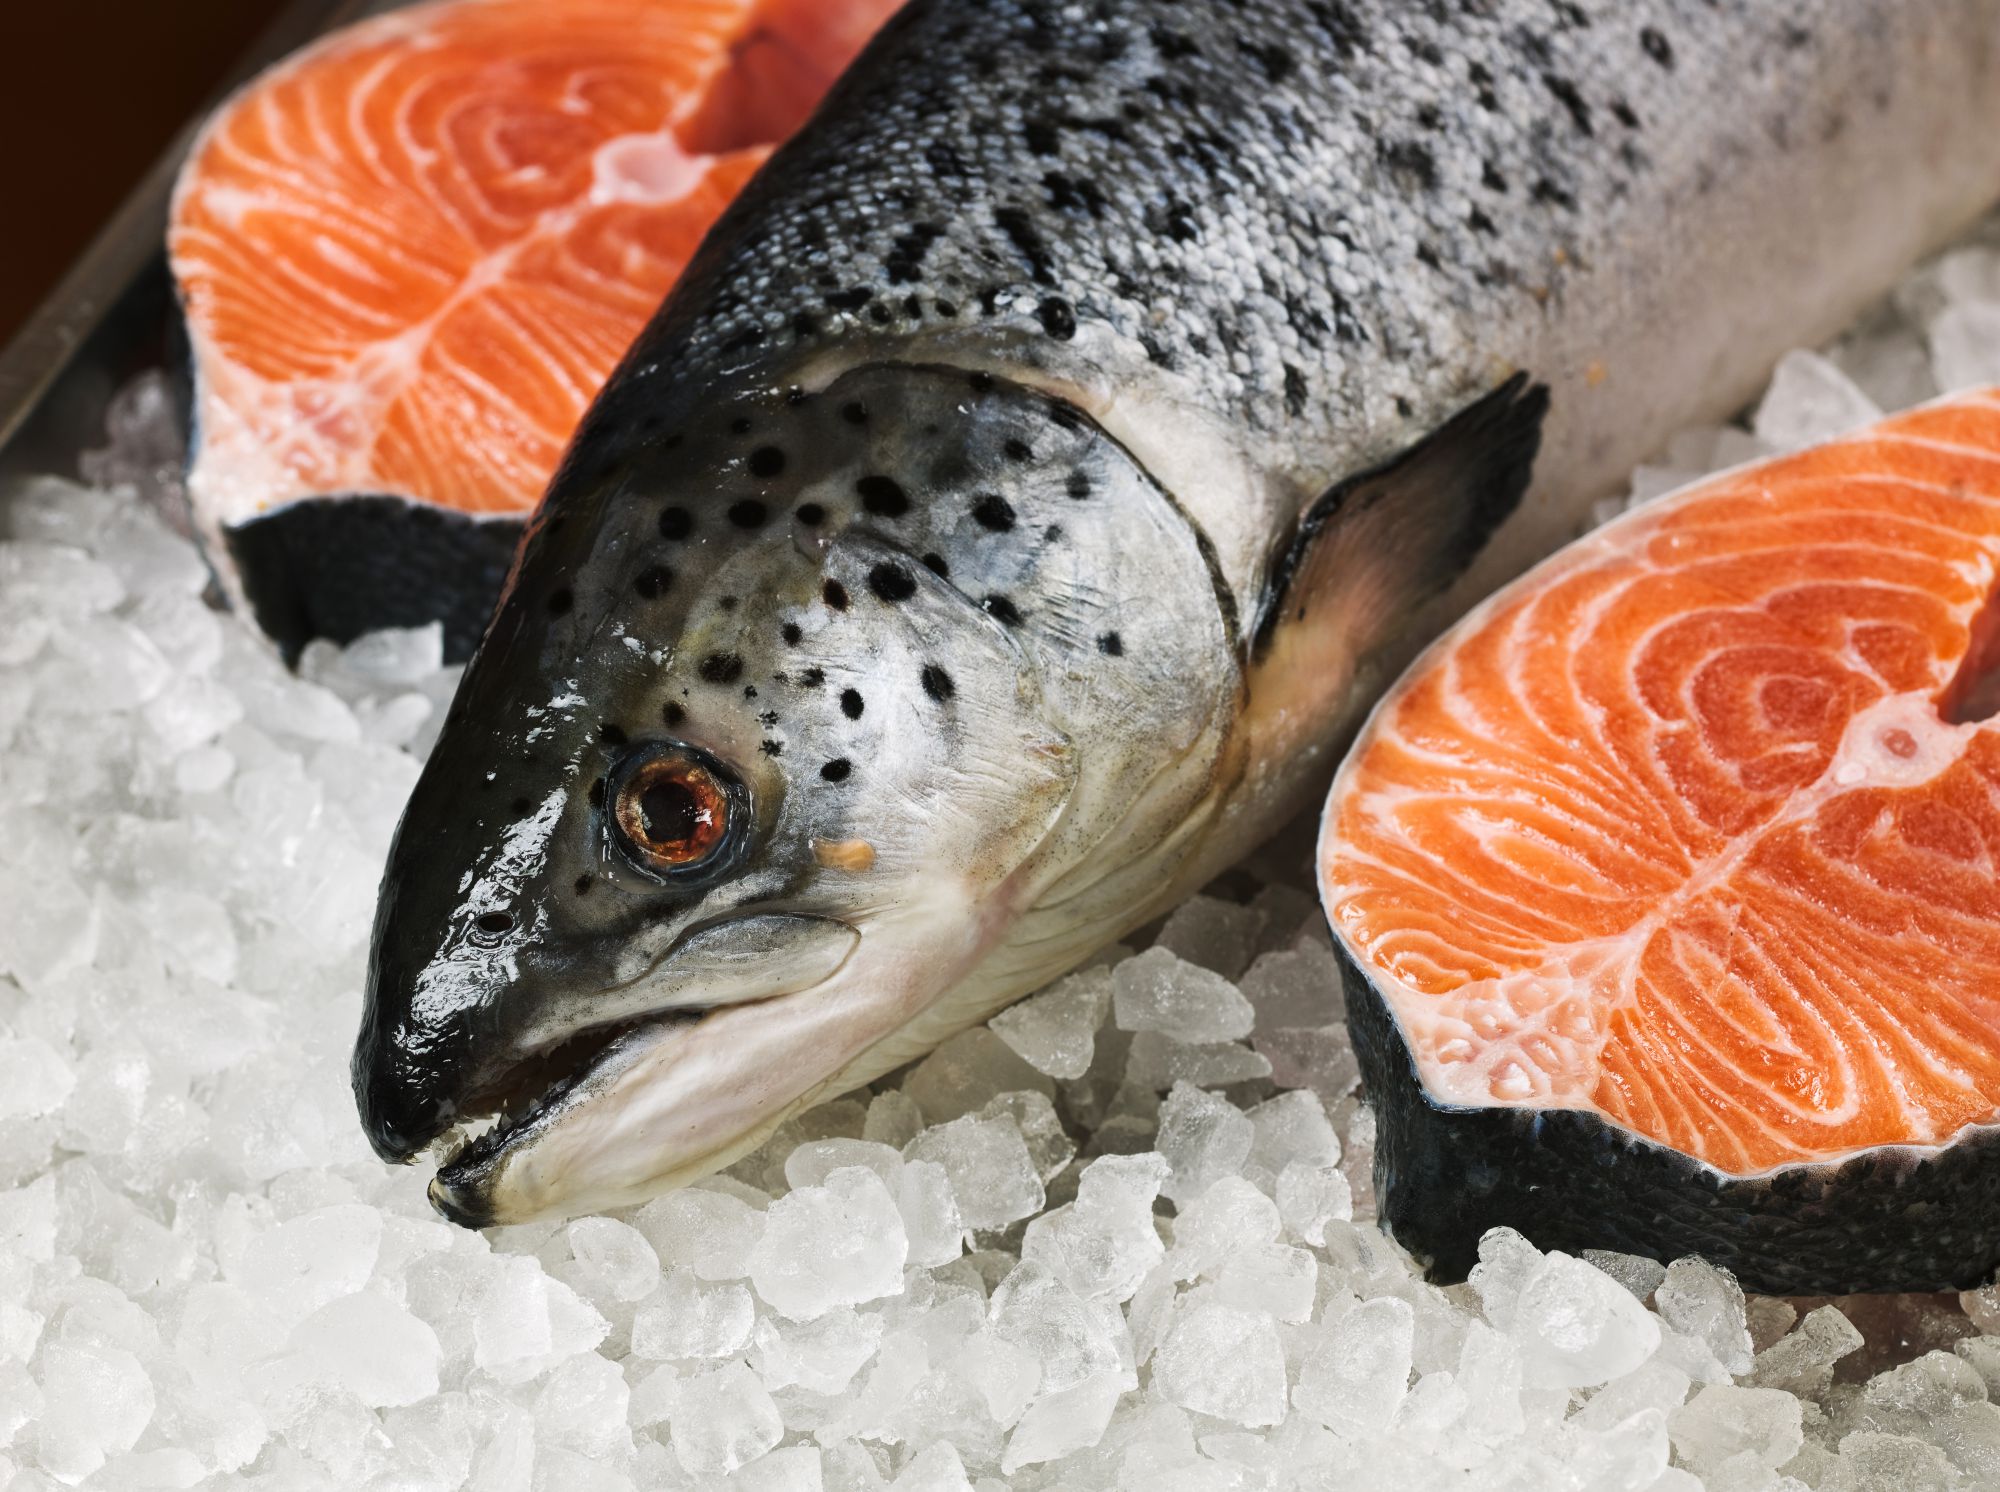 Market Fresh Seafood Delivery to Your Door in Australia